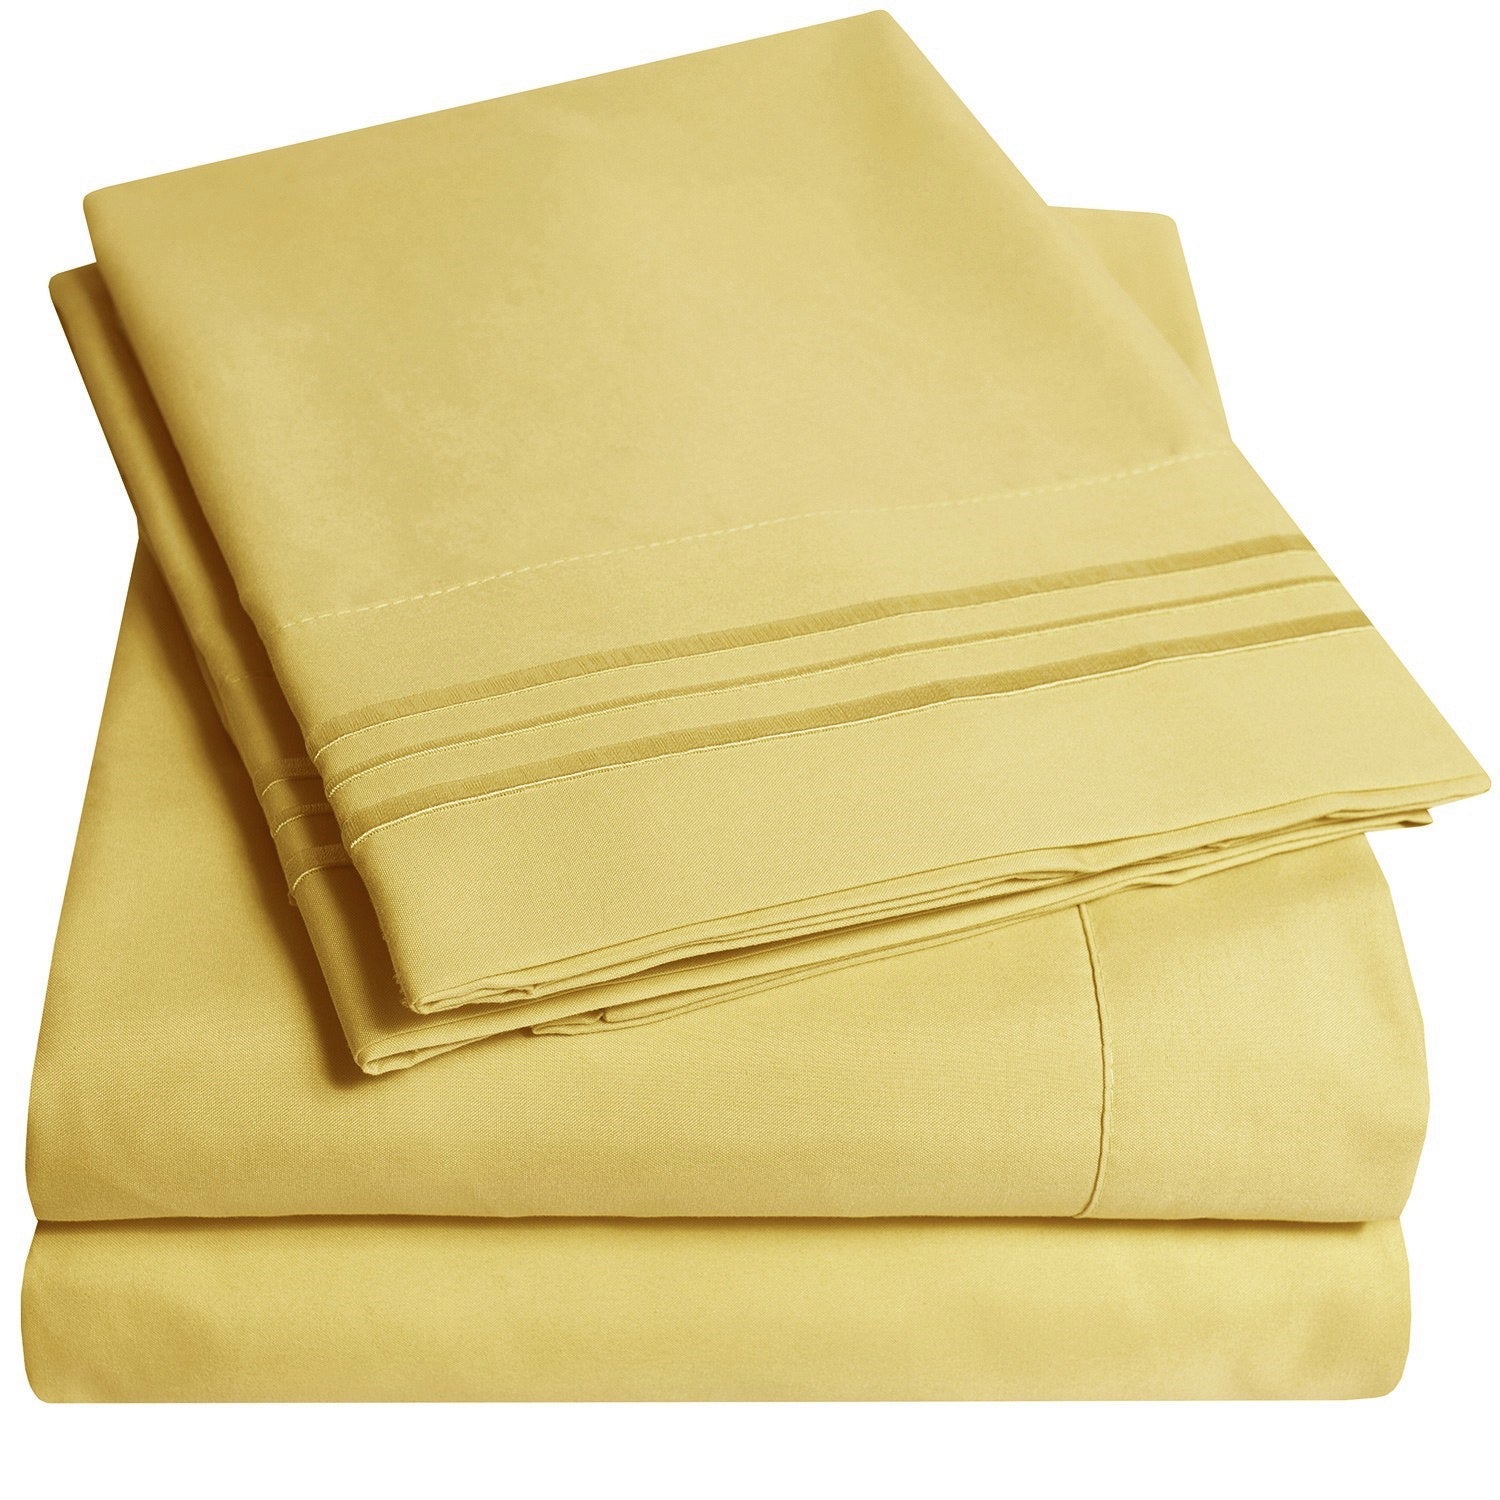 Classic 4-Piece Bed Sheet Set (Yellow) - Folded